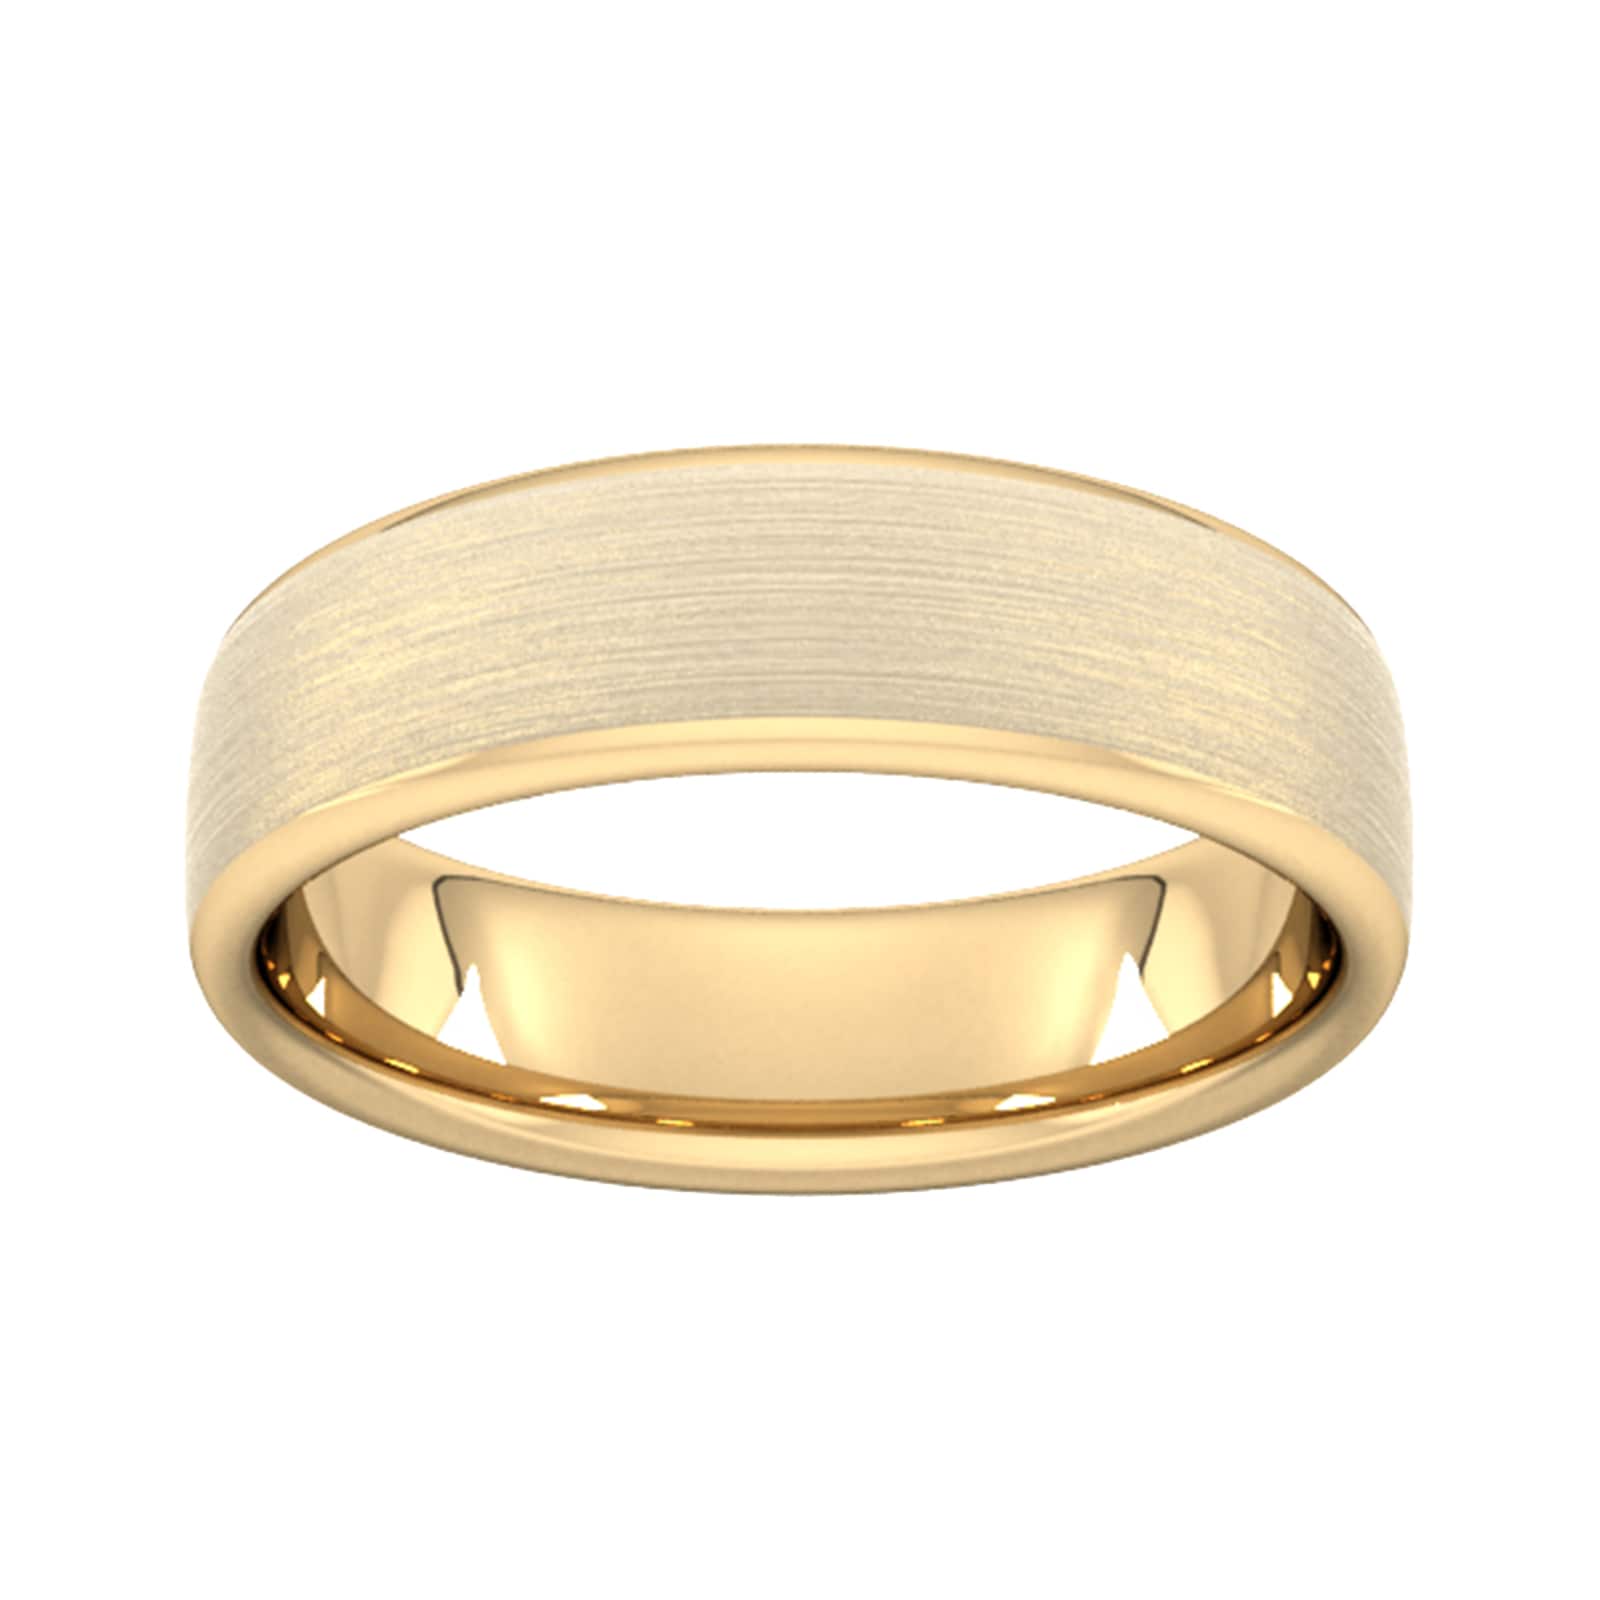 6mm Traditional Court Standard Matt Finished Wedding Ring In 18 Carat Yellow Gold - Ring Size U